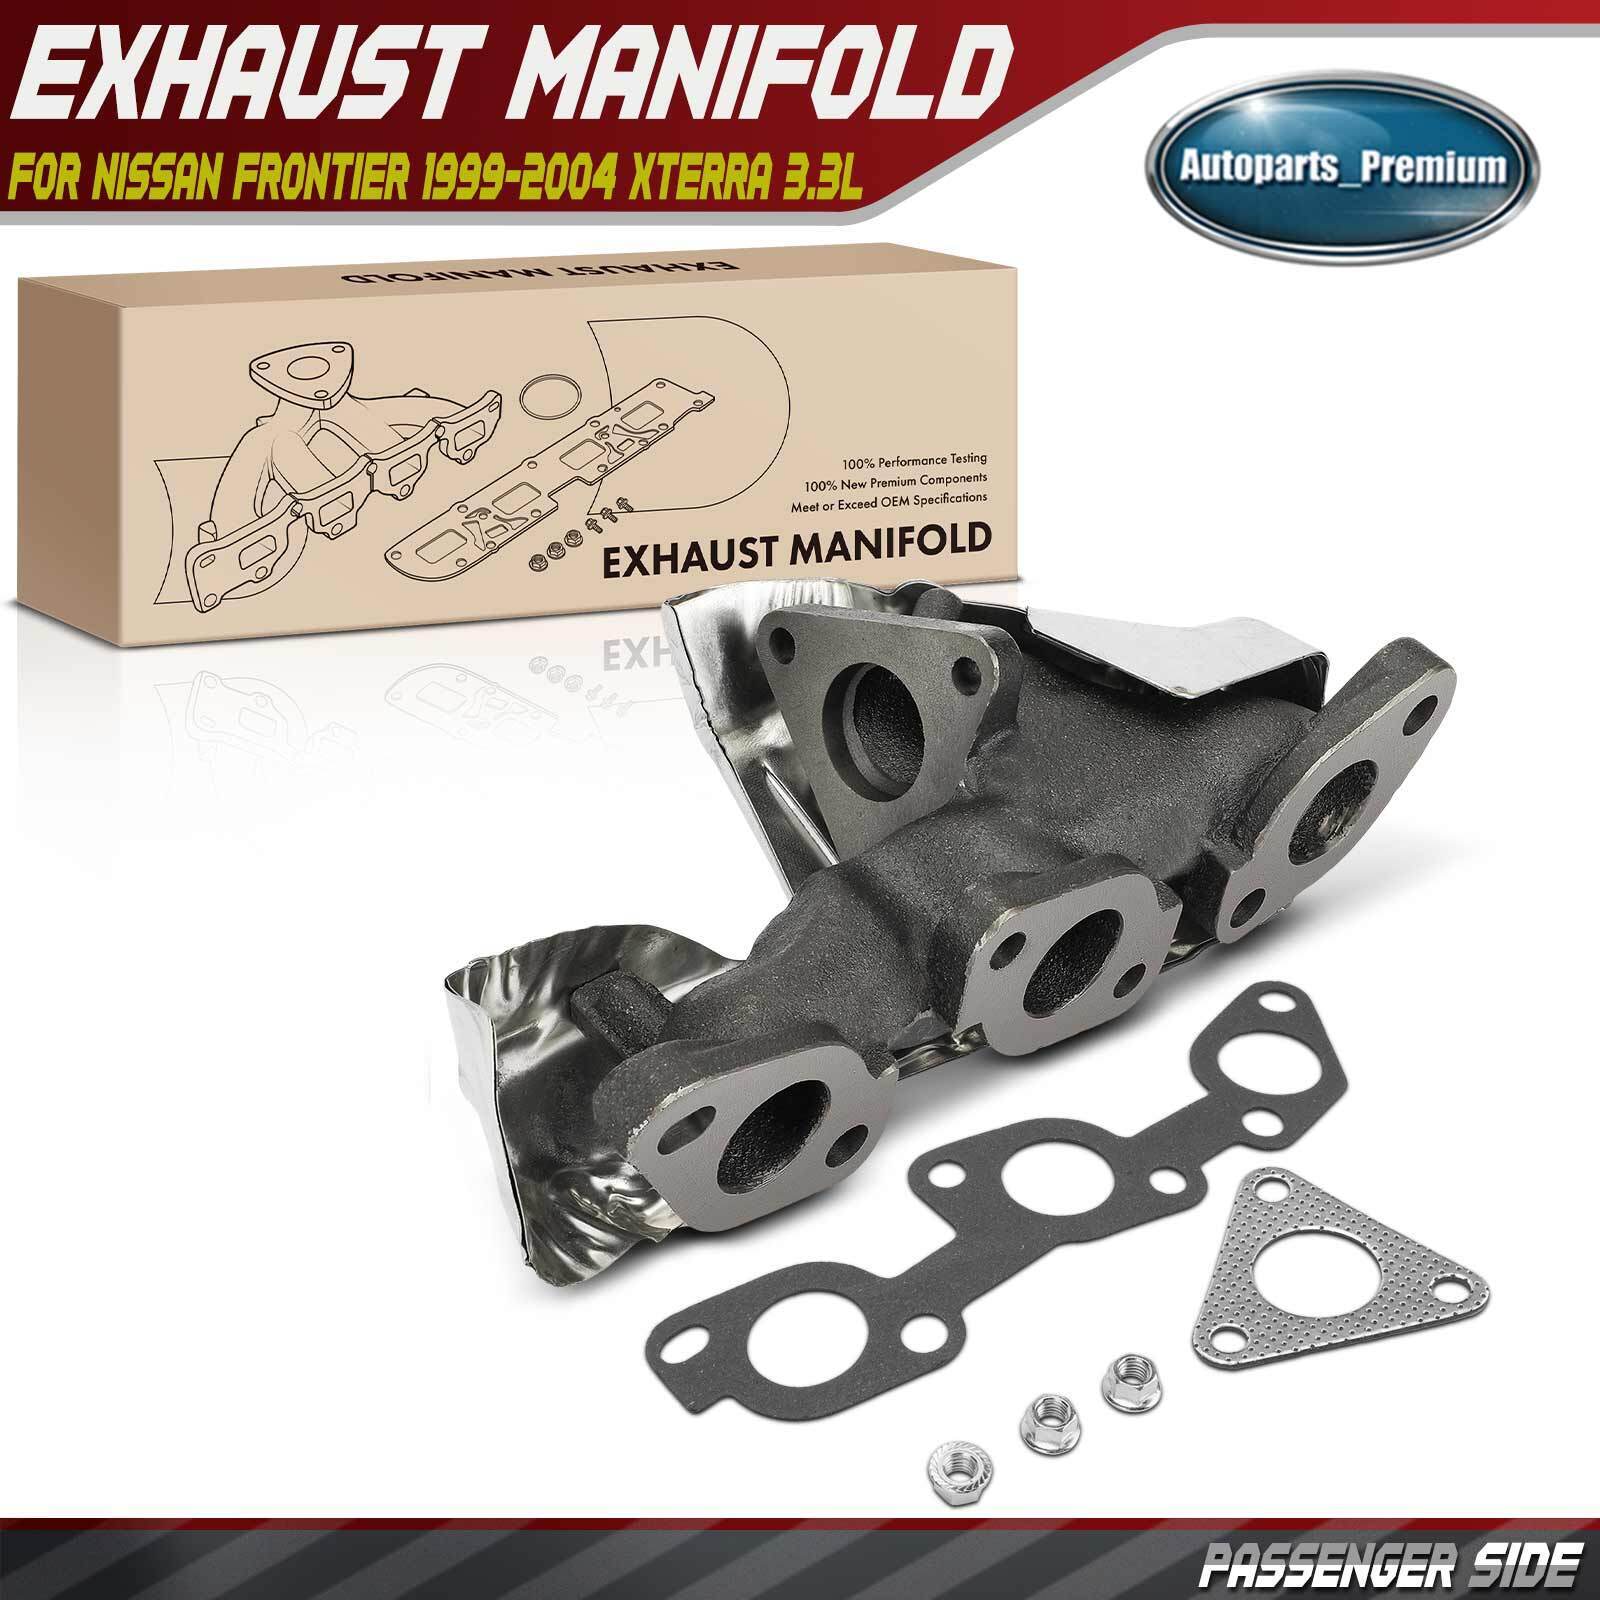 Right Exhaust Manifold w/ Gasket for Nissan Frontier 1999-2004 Xterra 00-04 3.3L